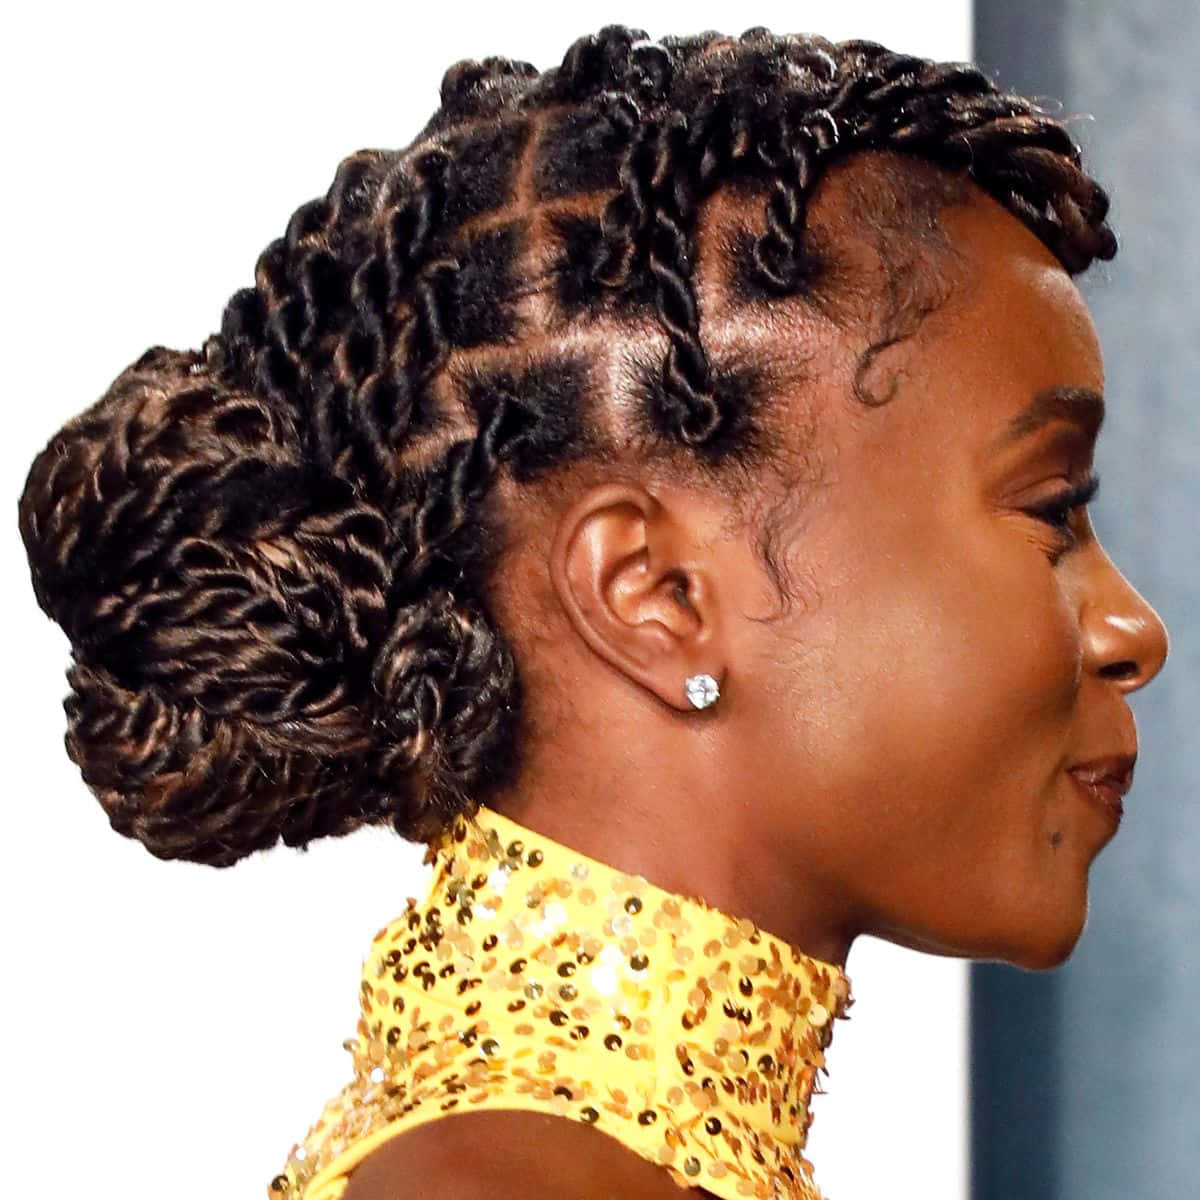 A Woman With A Braided Hairstyle